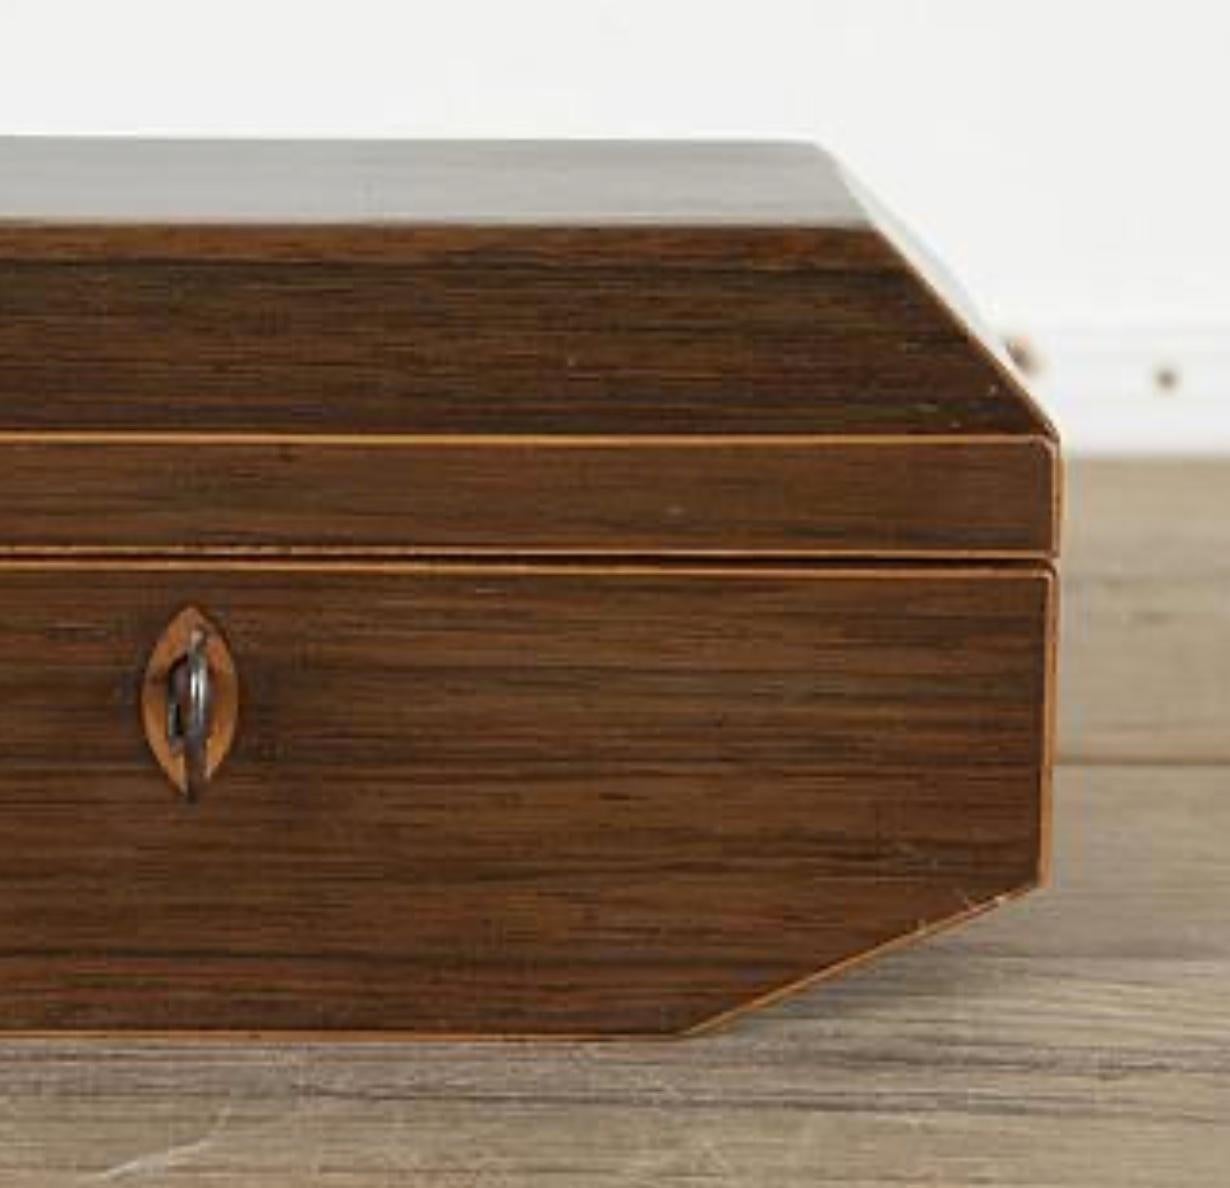 English Regency Wooden Glove Box For Sale